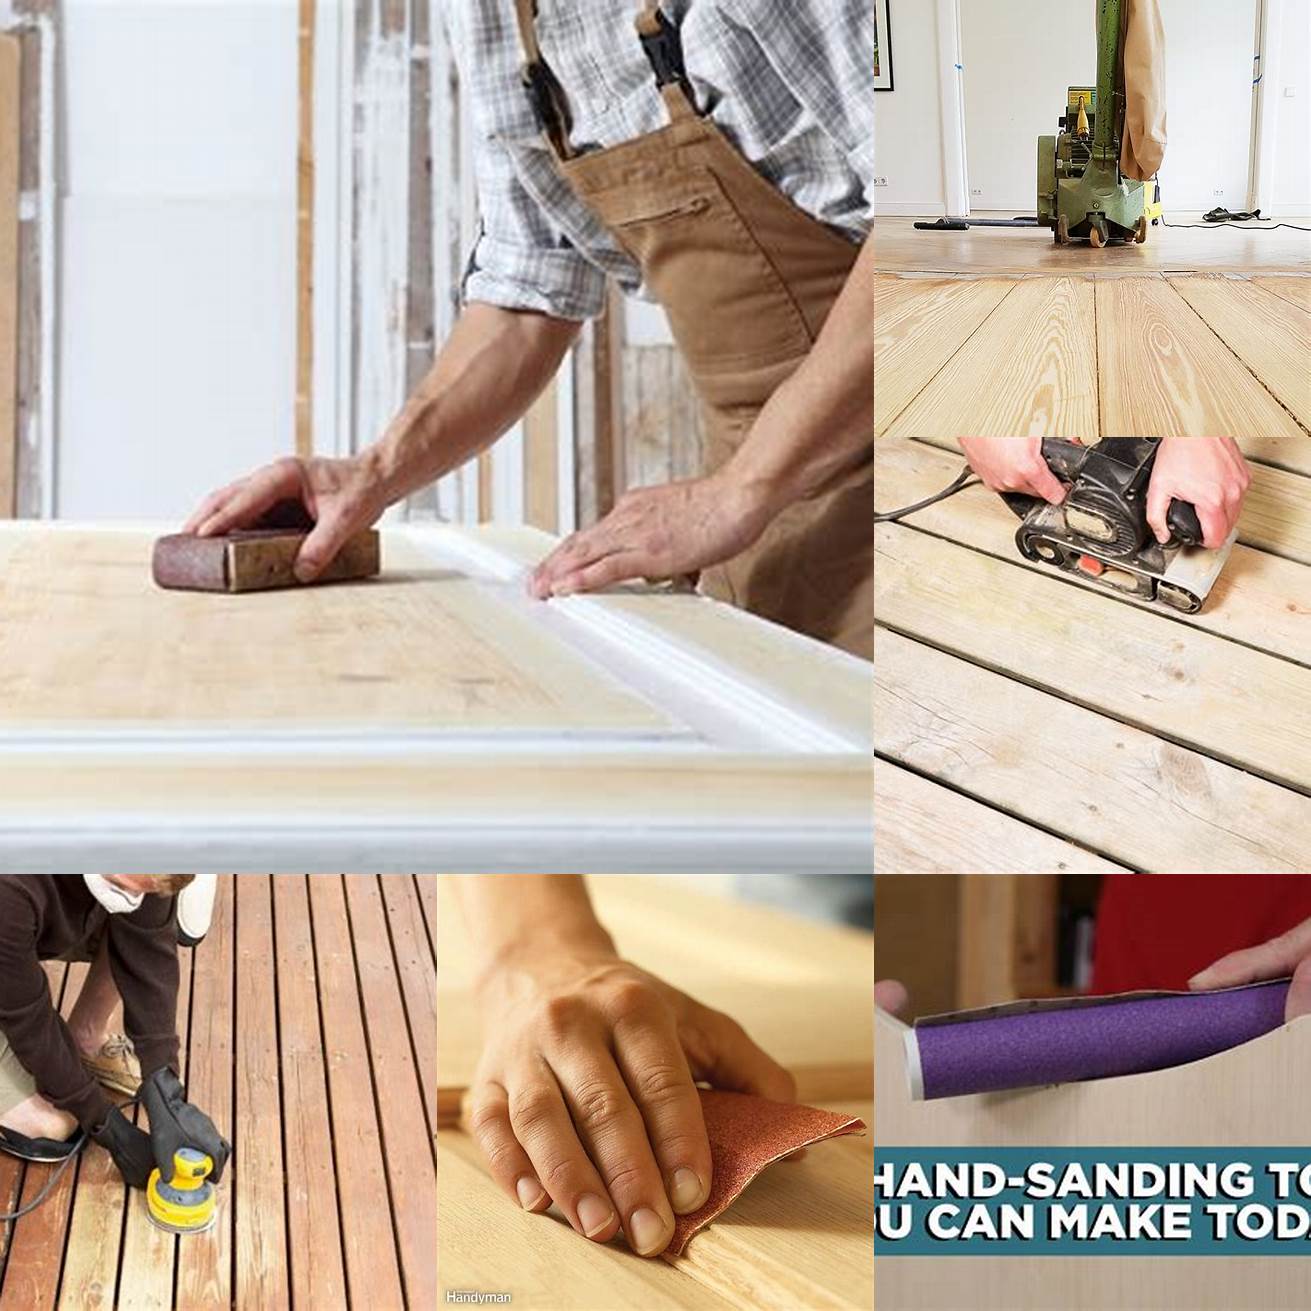 2 Sand the wood boards to create a smooth surface